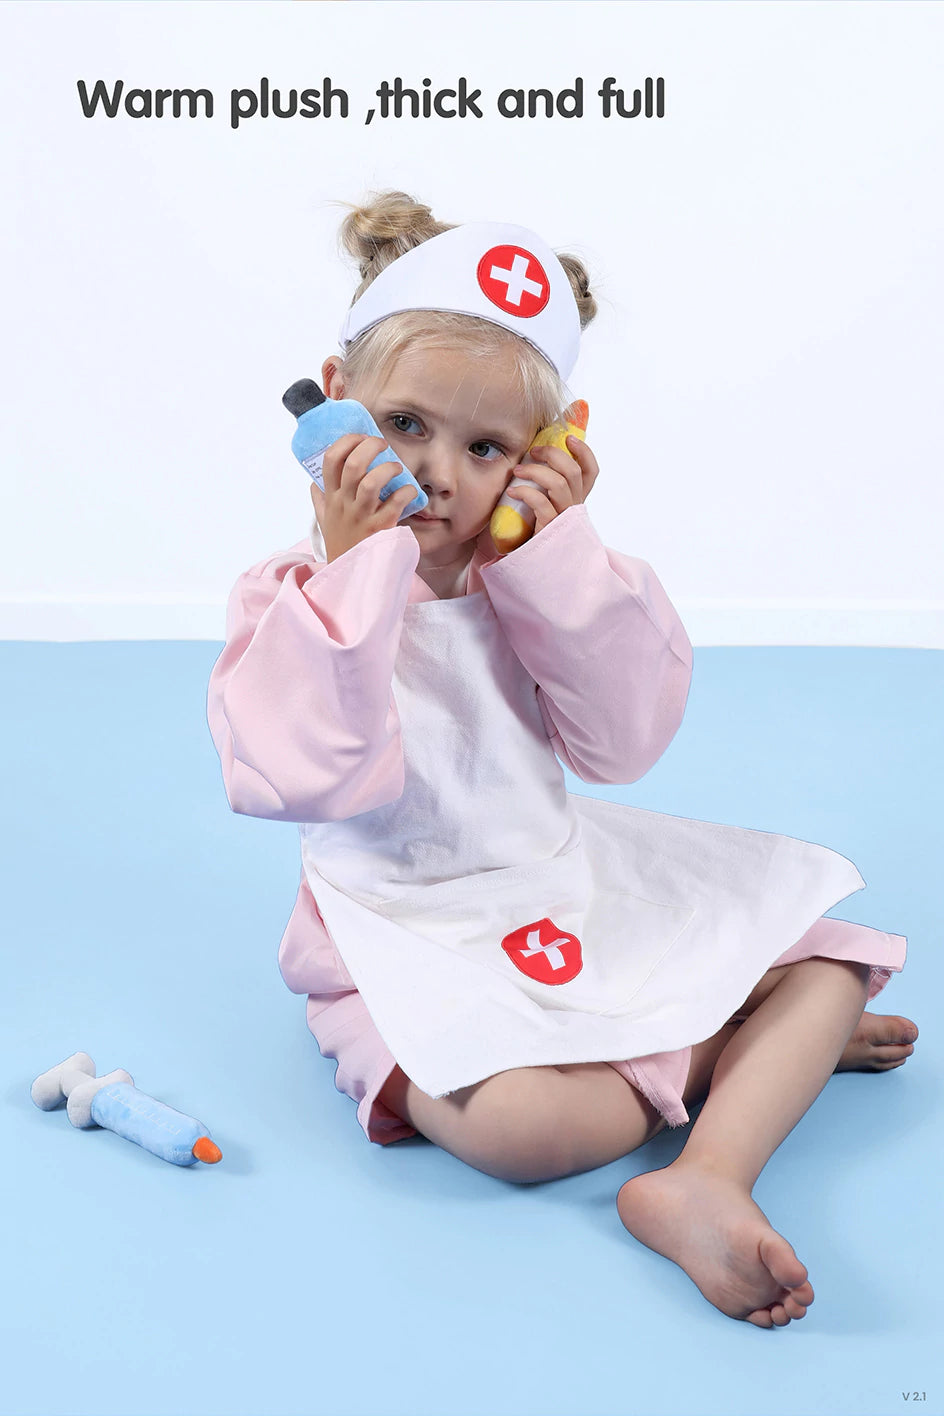 Dress up role play toy set for kids with doctor accessories